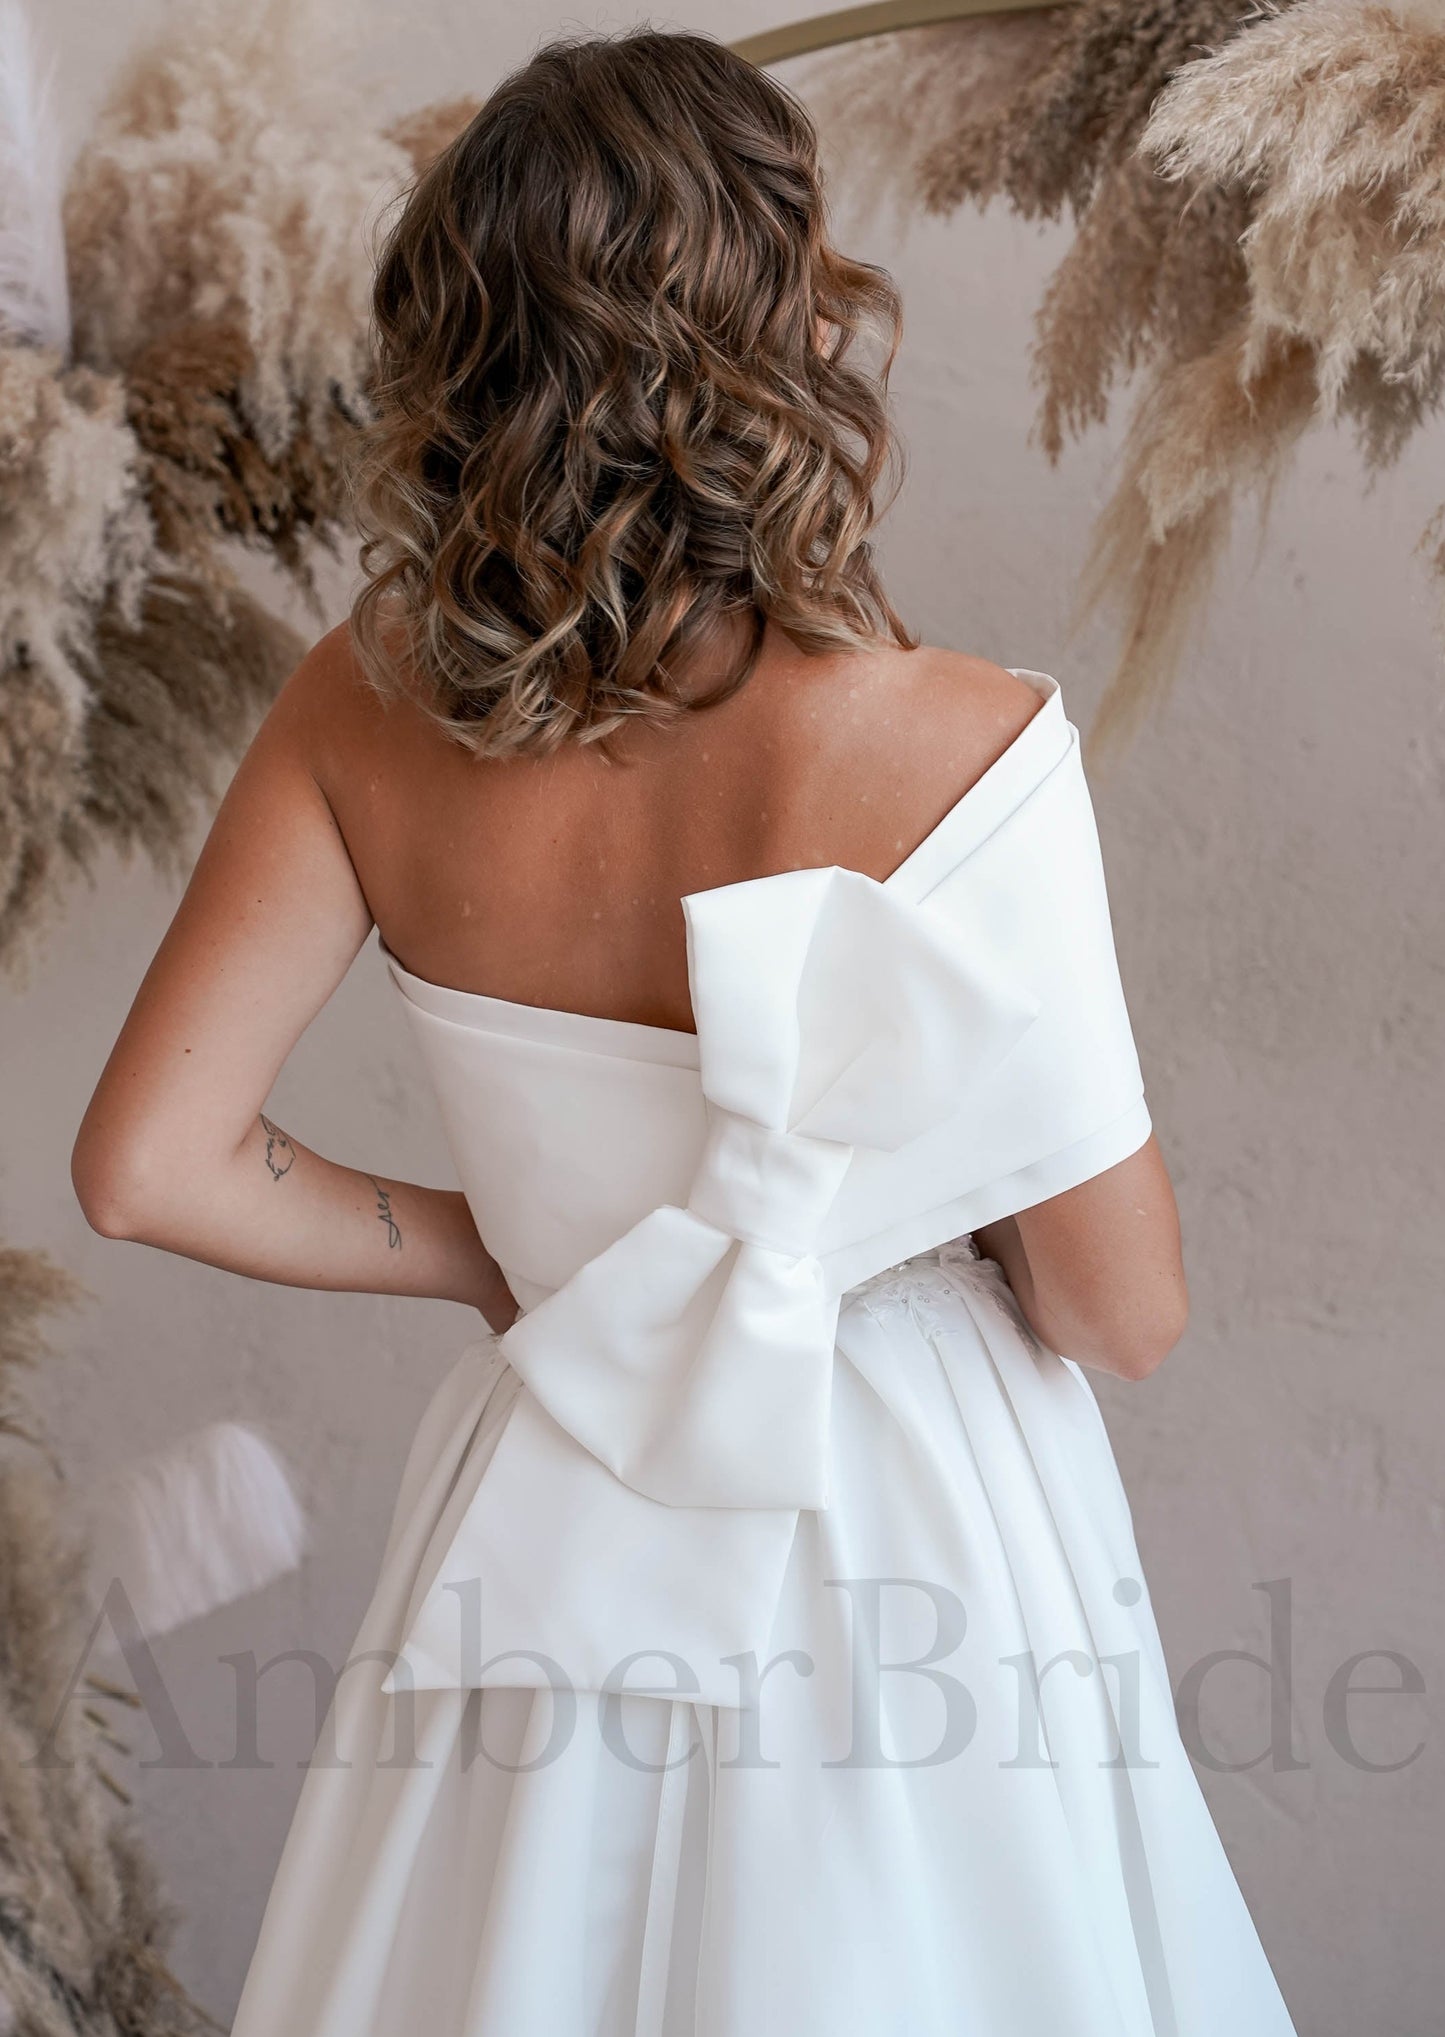 Unique Two Piece A Line Dress with One Shoulder Strapless Look and Bow Back Detail